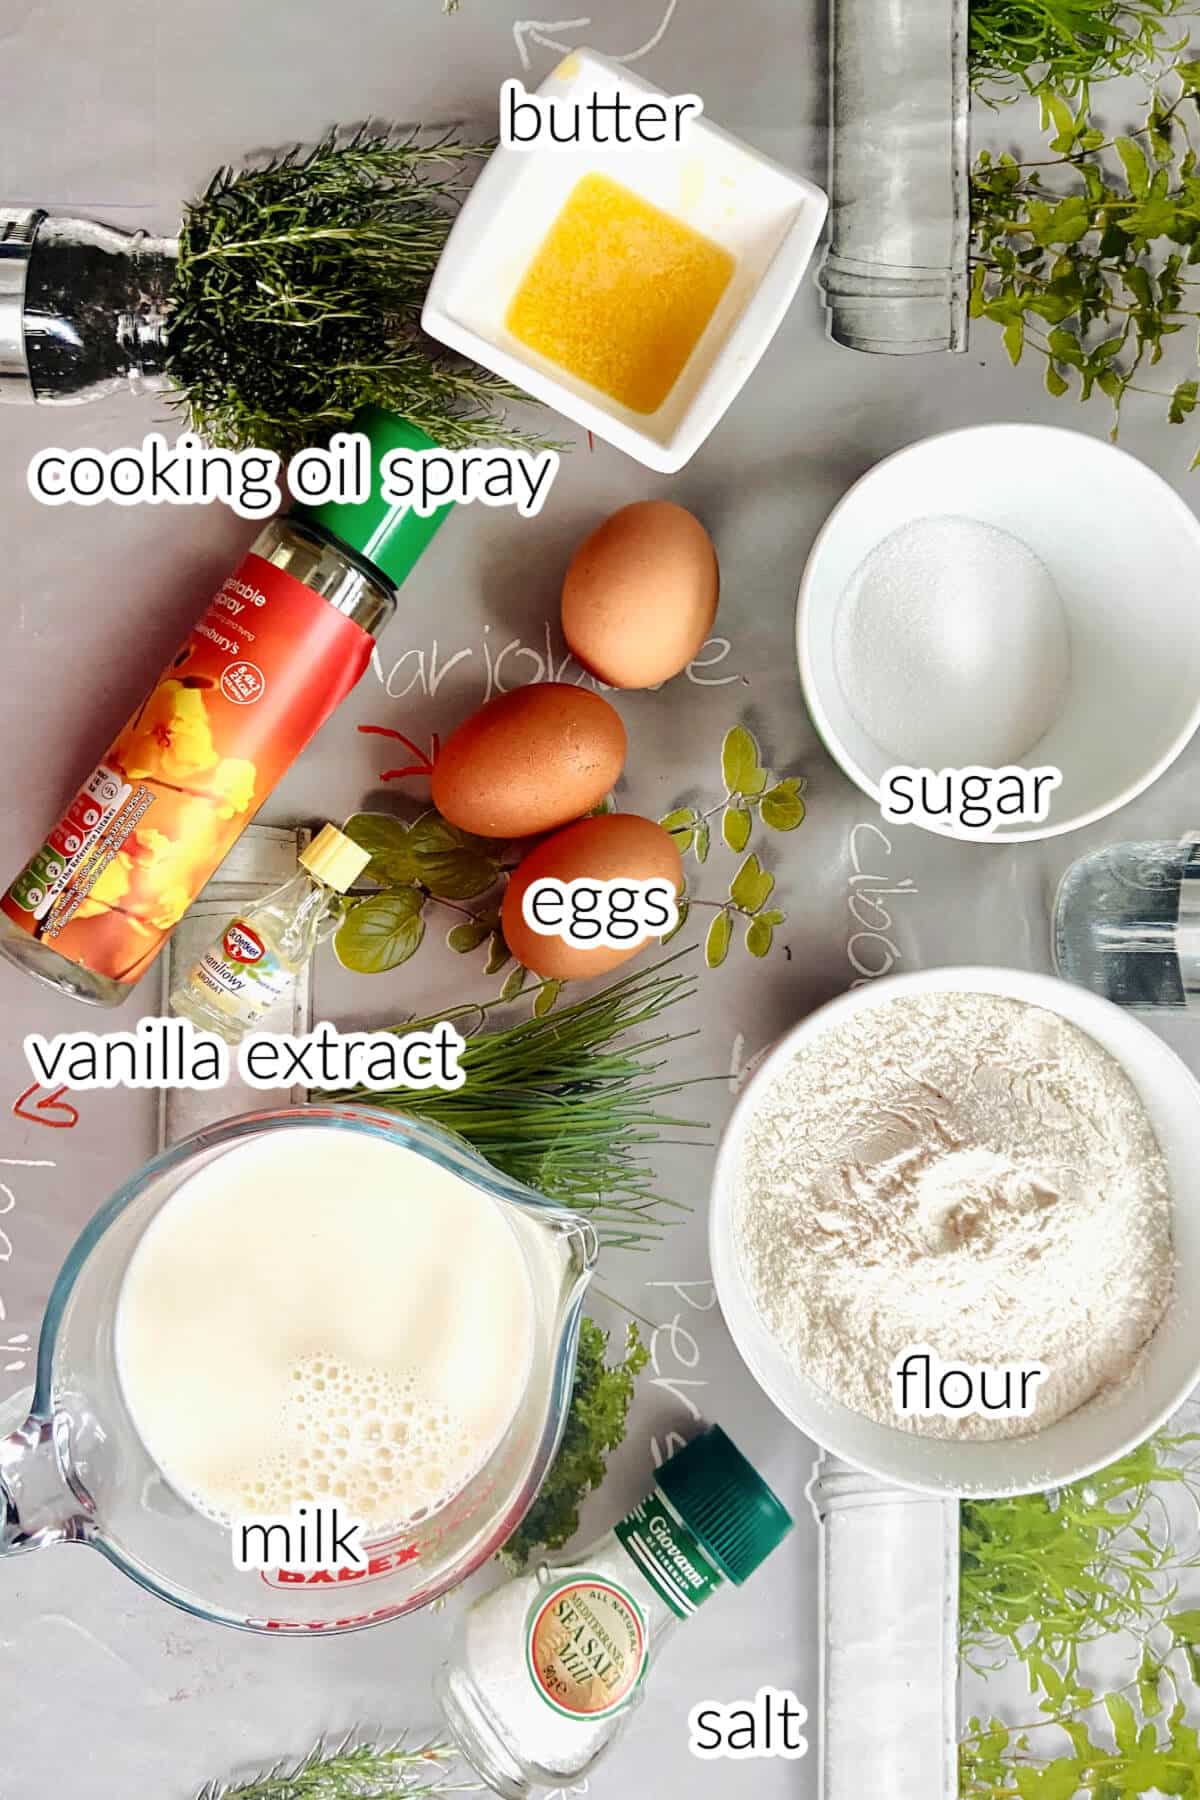 Ingredients needed to make crepes.